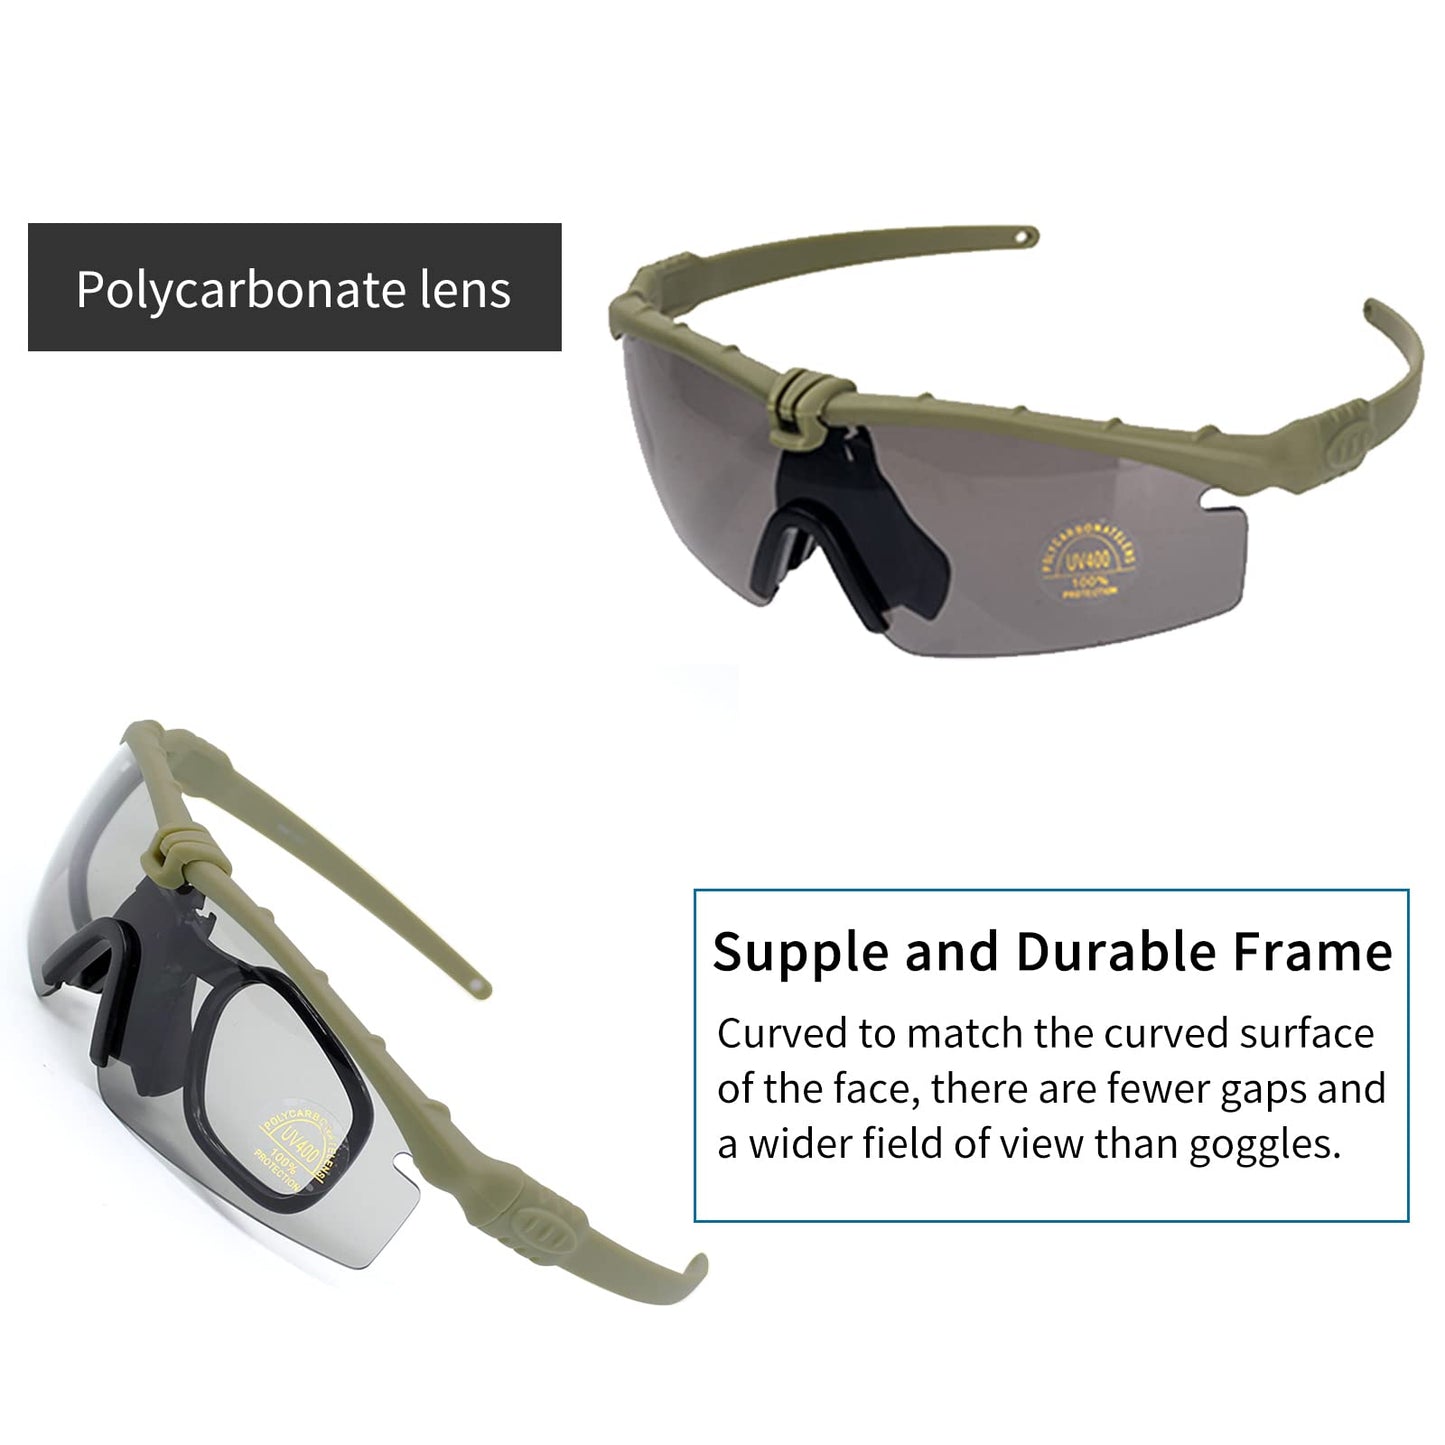 FOCUHUNTER Outdoor Sports Glasses Adjustable Sports Glasses with Anti-Skid Glasses Strap Tactical Eye Protection Sunglasses for Motorcycling,Cycling, Driving,Running